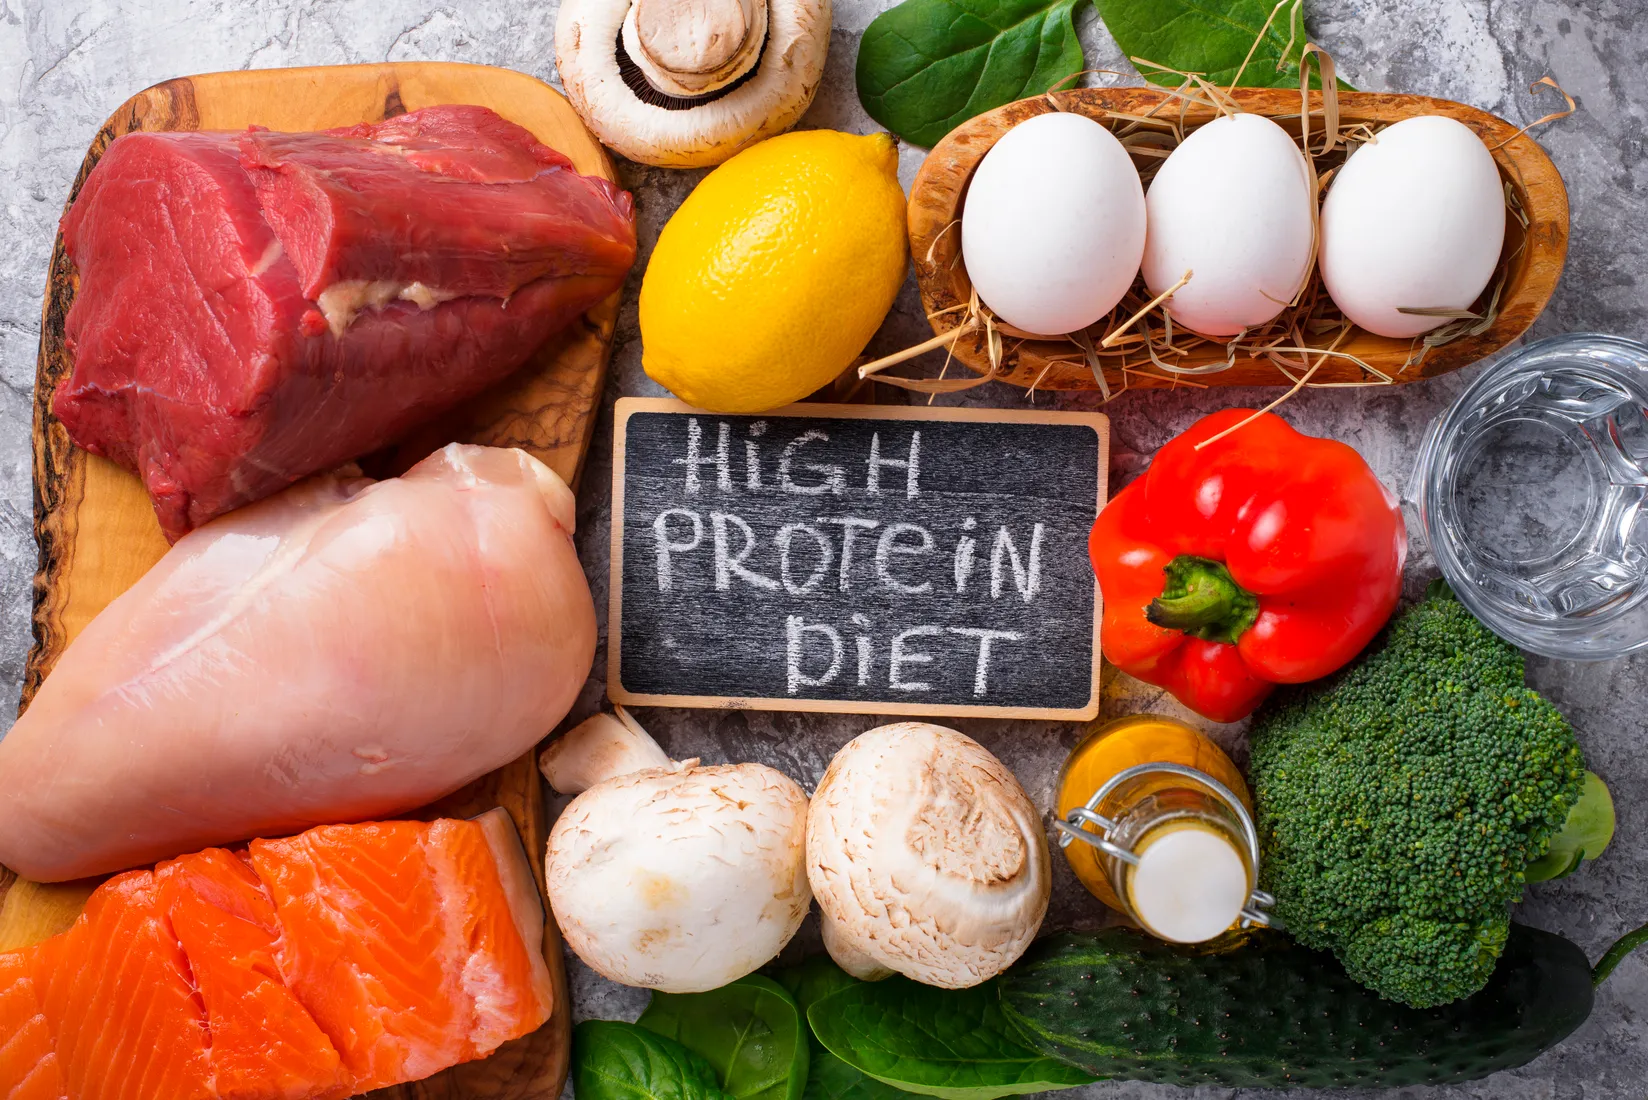 Weight loss high protein diet for weight loss